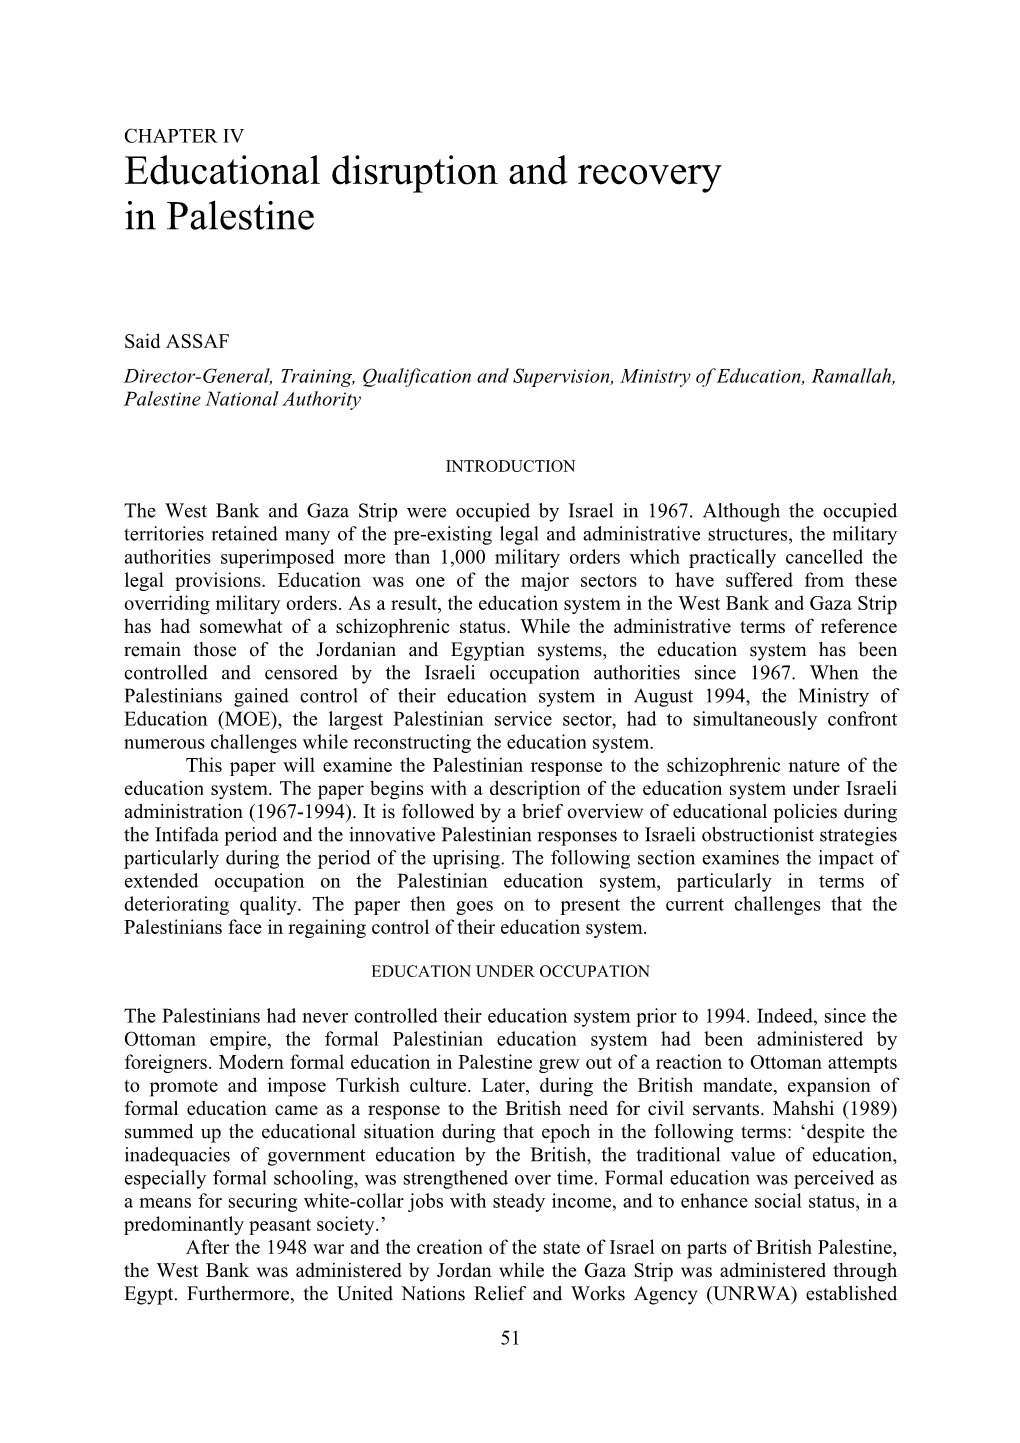 Educational Disruption and Recovery in Palestine